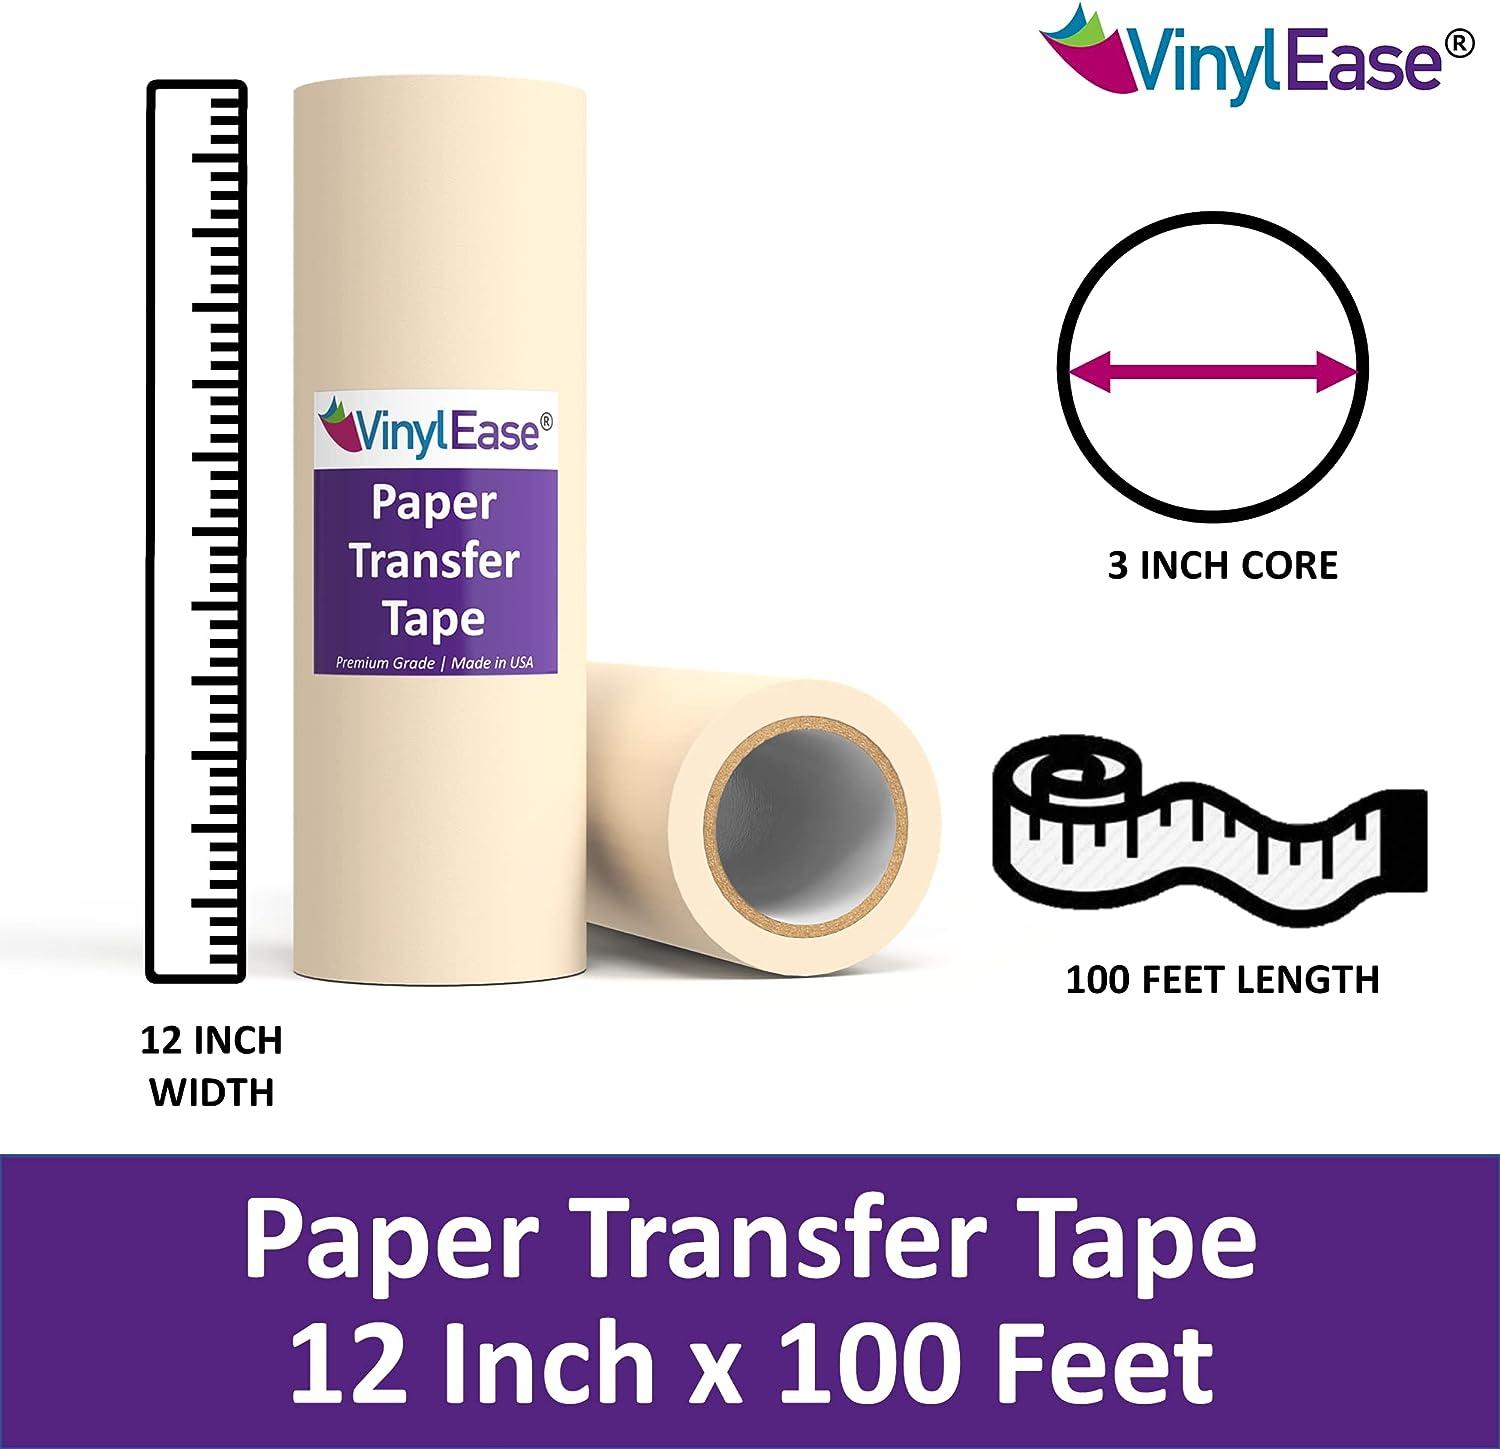  Vinyl Ease 12inch x 100 feet roll of Paper Transfer Tape with a  Medium to High Tack Layflat Adhesive. Works with a Variety of Vinyl. Great  for Decals, Signs, Wall Words